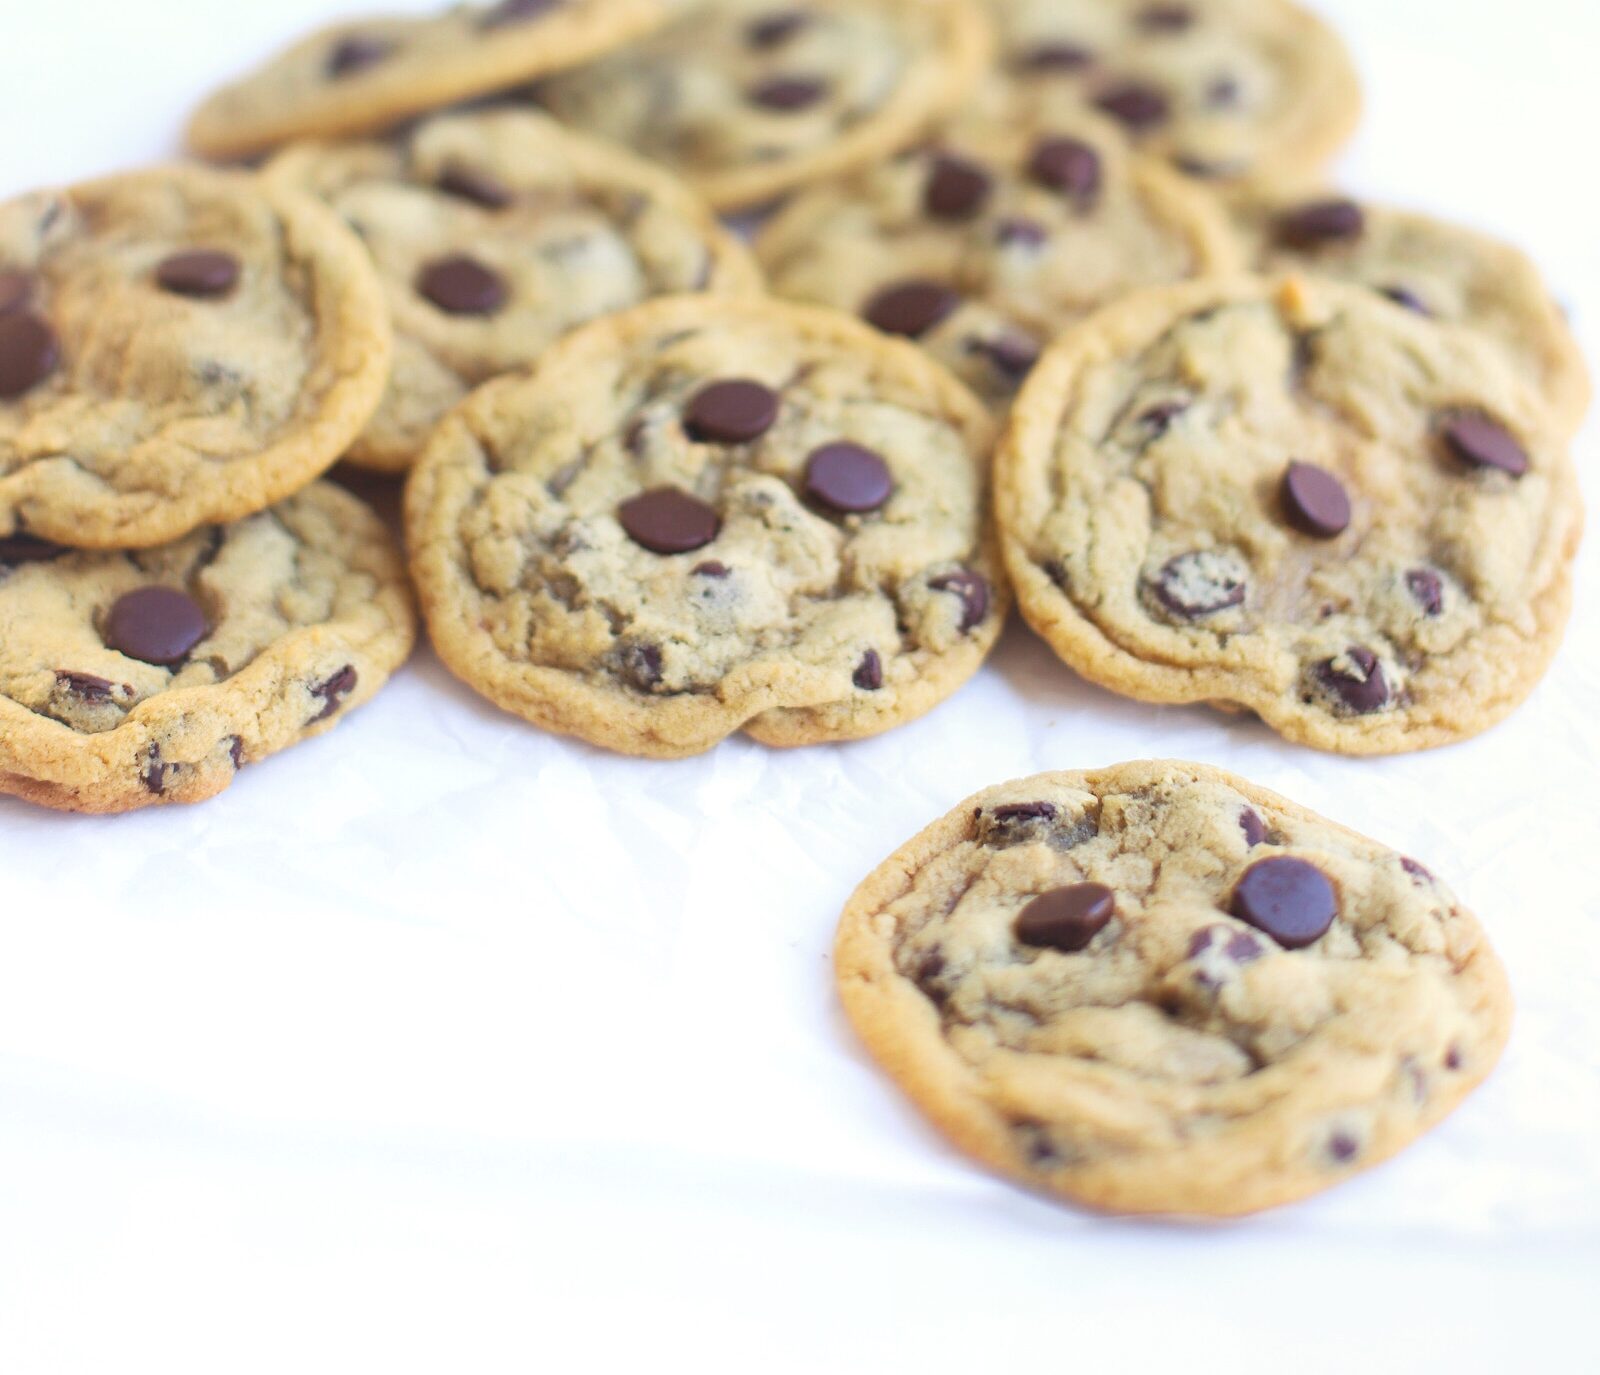 These are the very best dairy free chocolate chip cookies ever. Made in one bowl, the easy recipe results in ooey gooey, oh-so-soft and chewy perfect chocolate chip cookies every time. Plus, we have a few tricks for making these cookies vegan, and/or gluten-free too! | glitterinc.com | @glitterinc